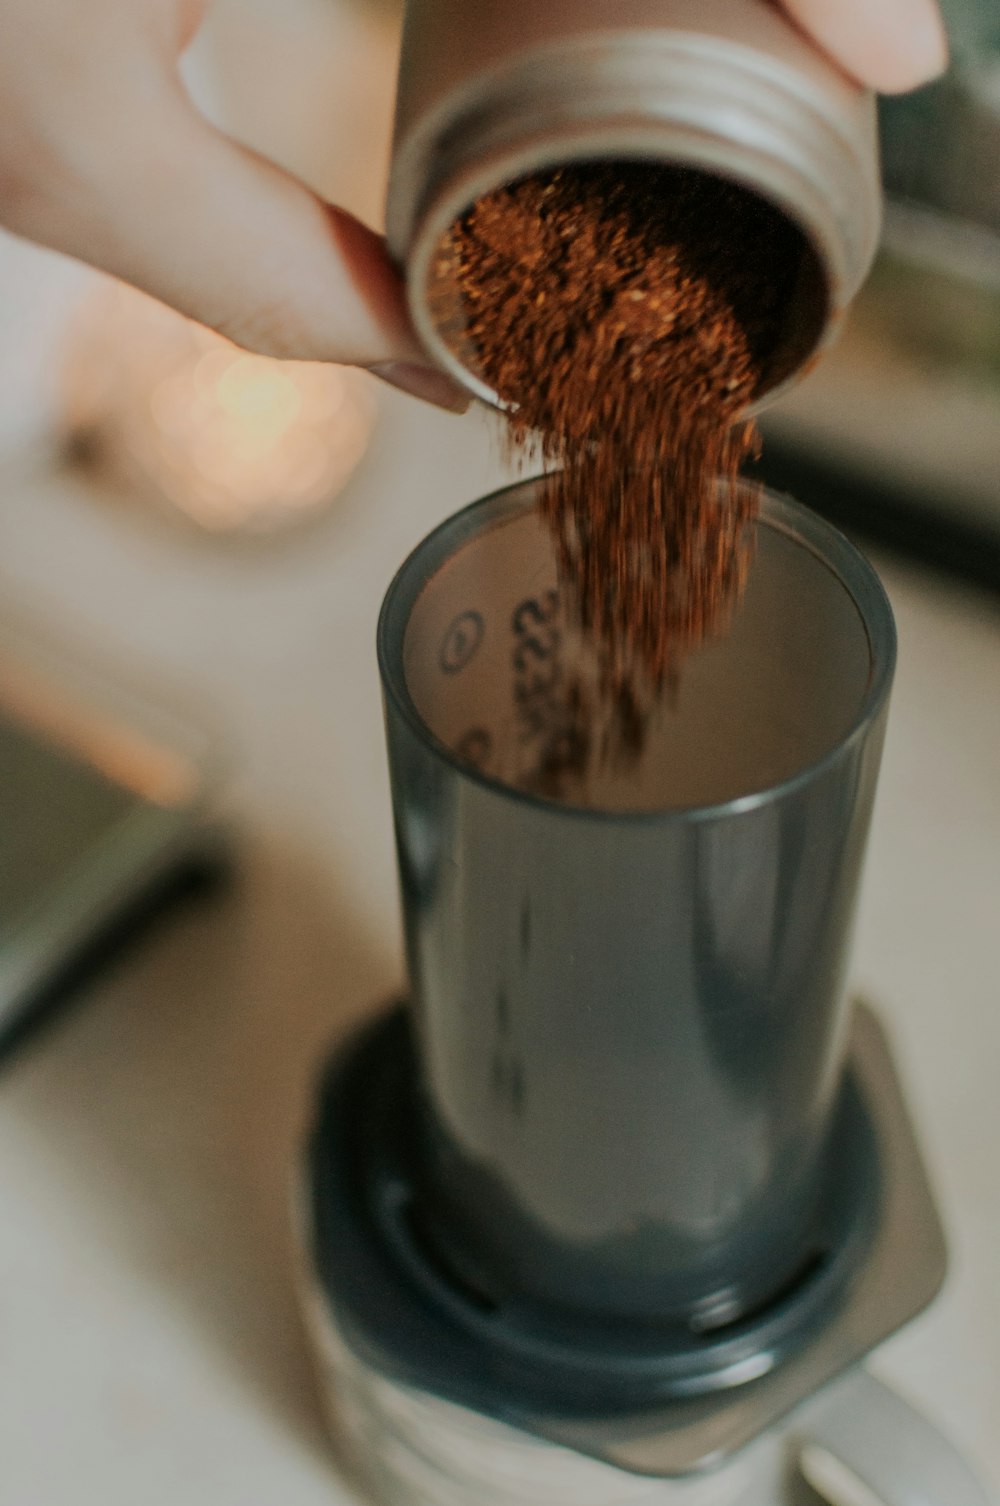 a person is pouring coffee into a cup